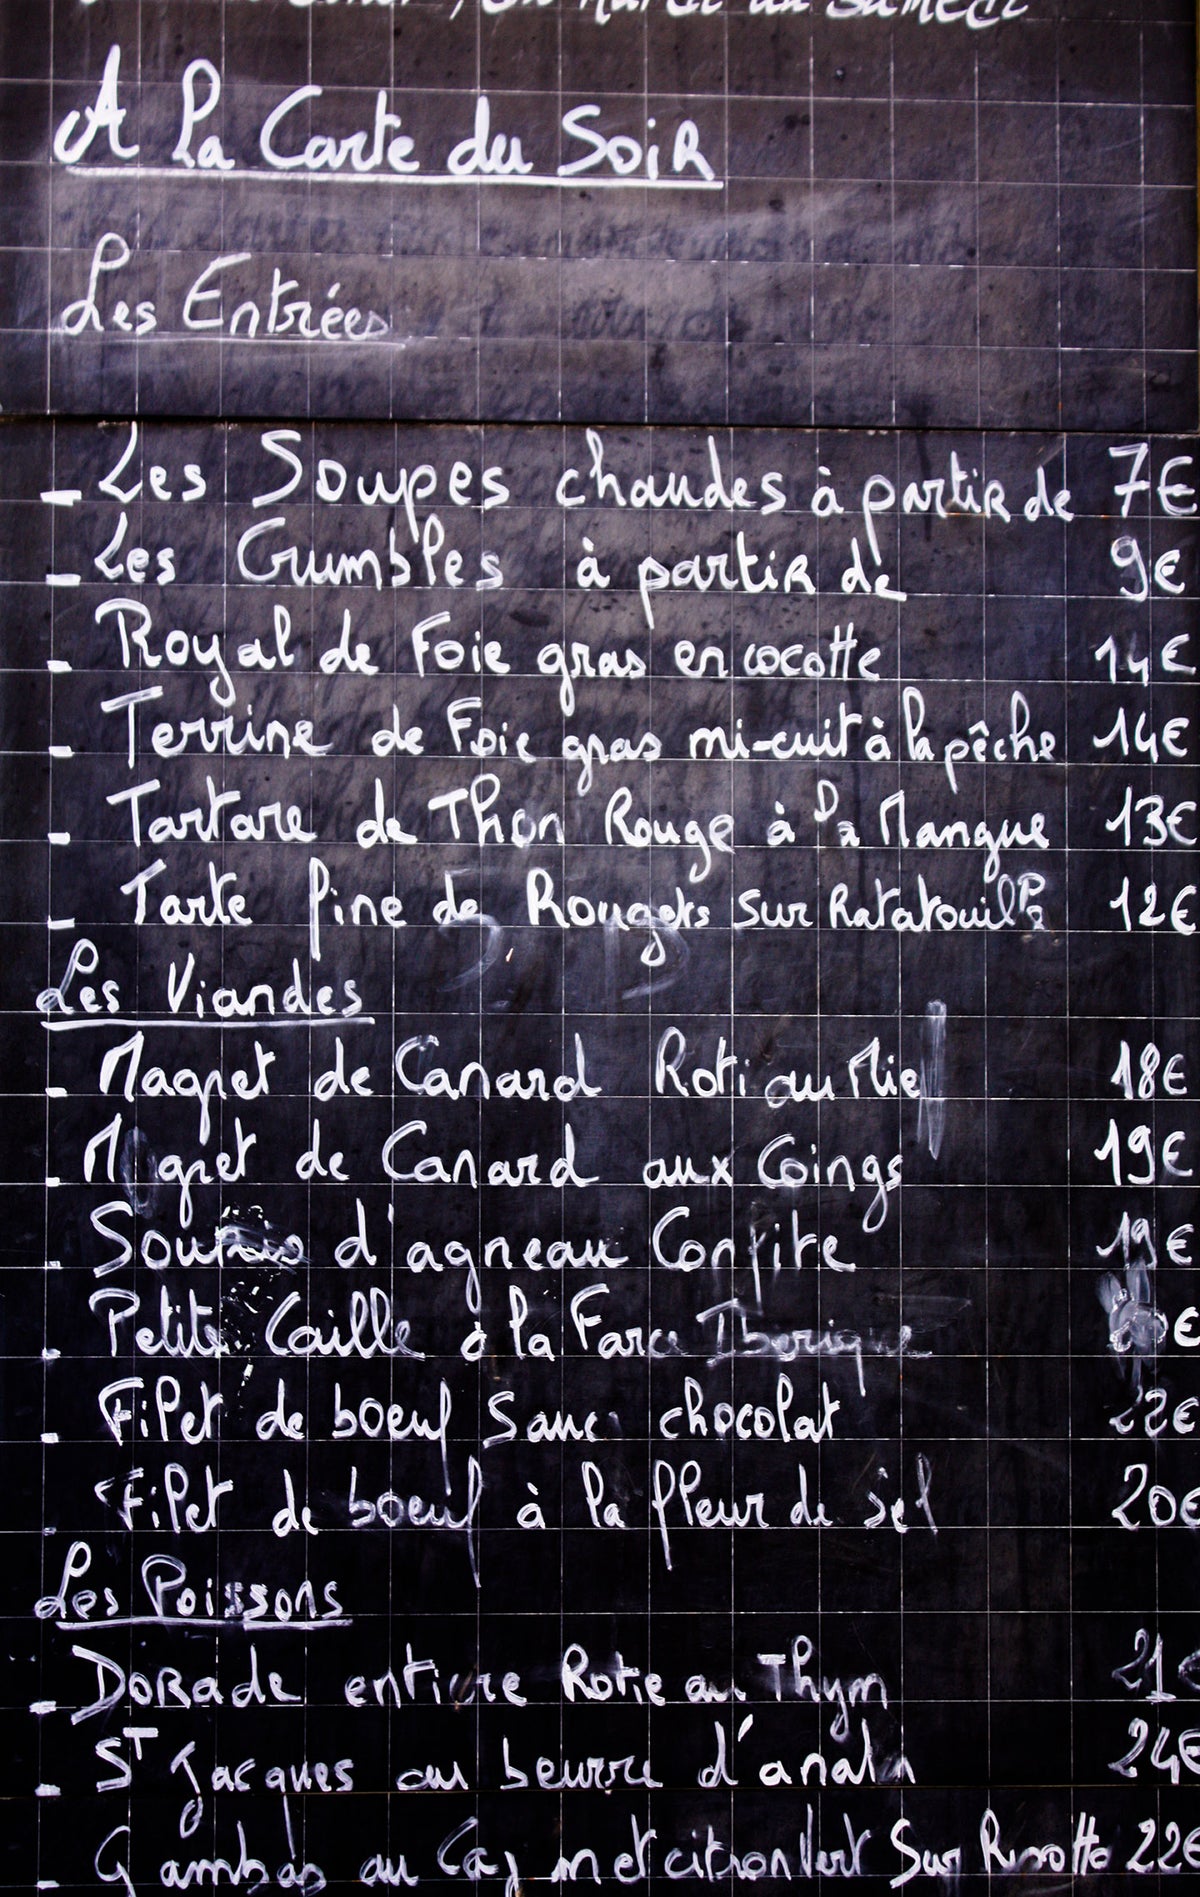 Classic French Menu France - Every Day Paris 